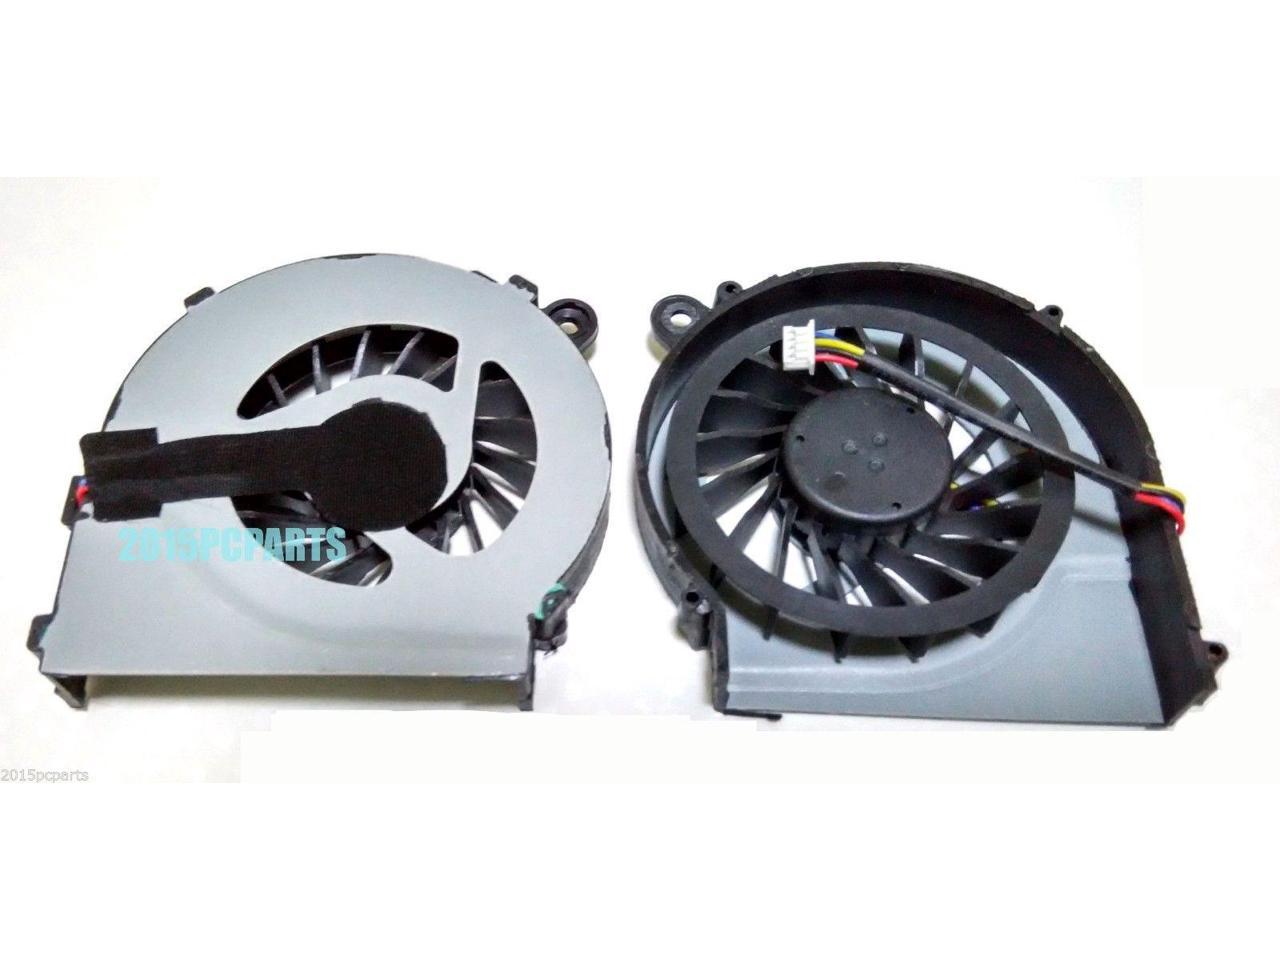 New For HP g6-1d62nr g6-1d63nr g6-1d65ca g6-1d26dx g6-1d28dx CPU FAN With Grease 